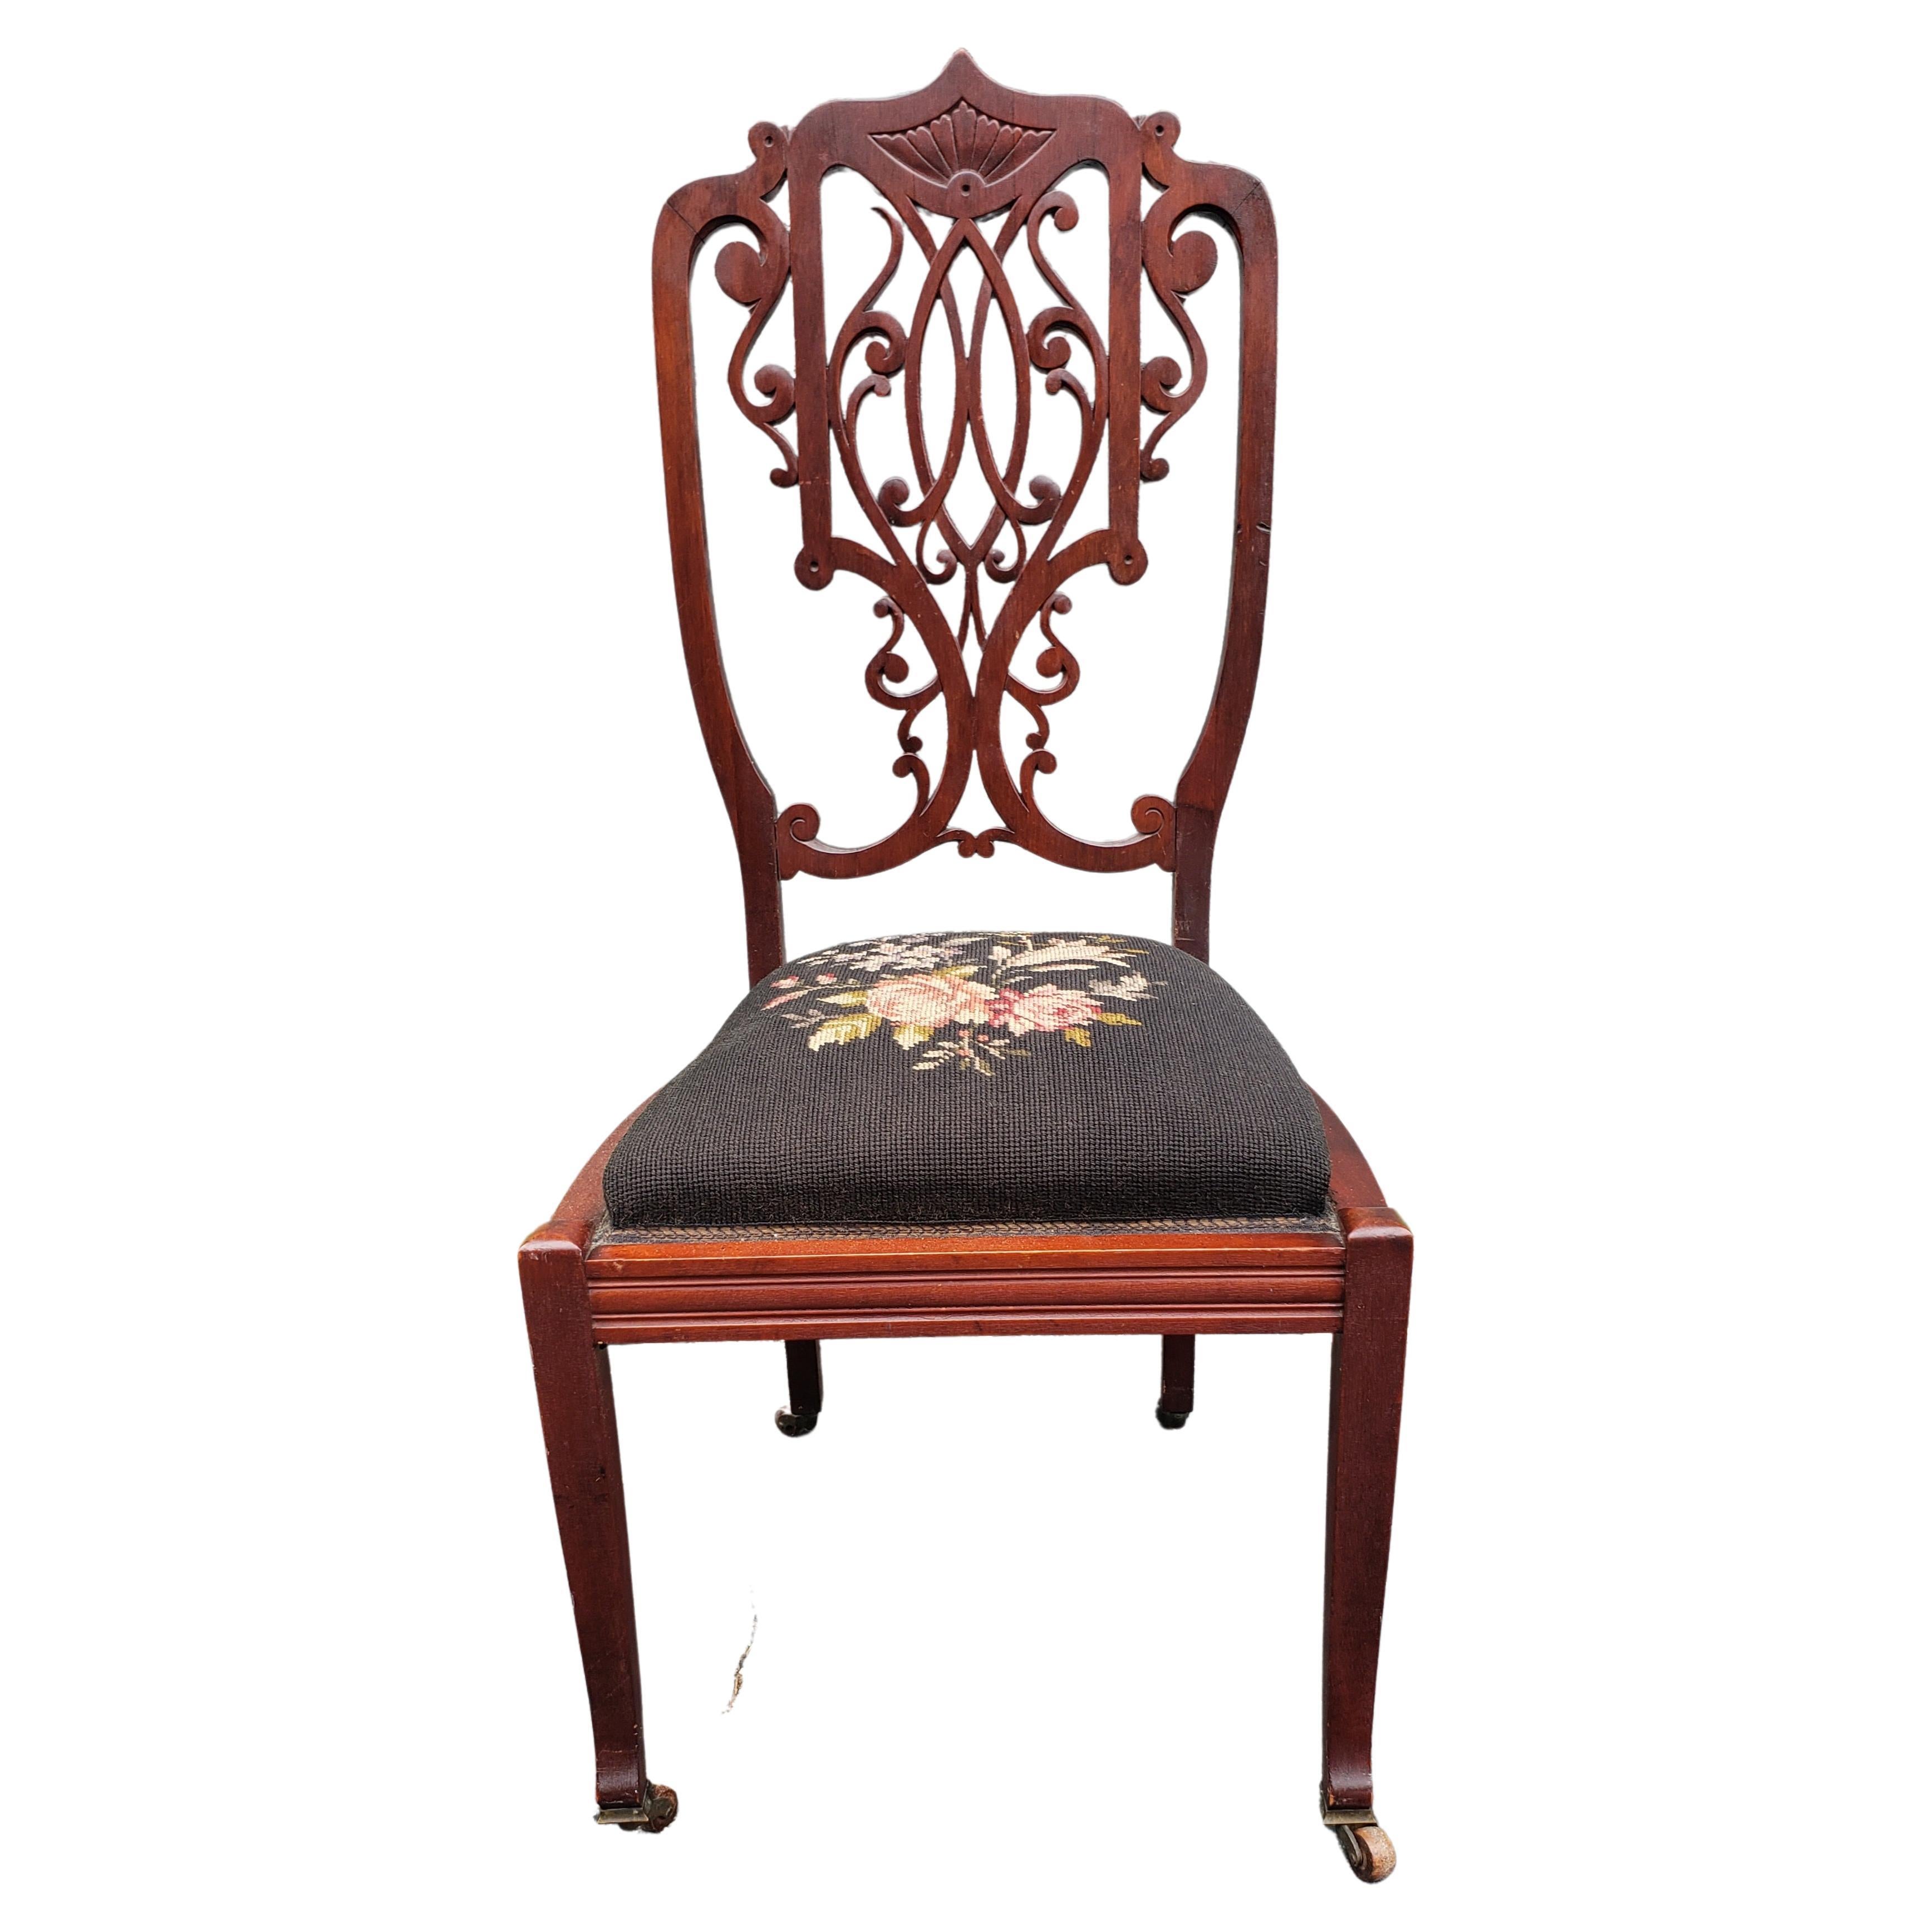 Late 19th C. Victorian Mahogany and Needlepoint Upholstered Side Chair on Wheels For Sale